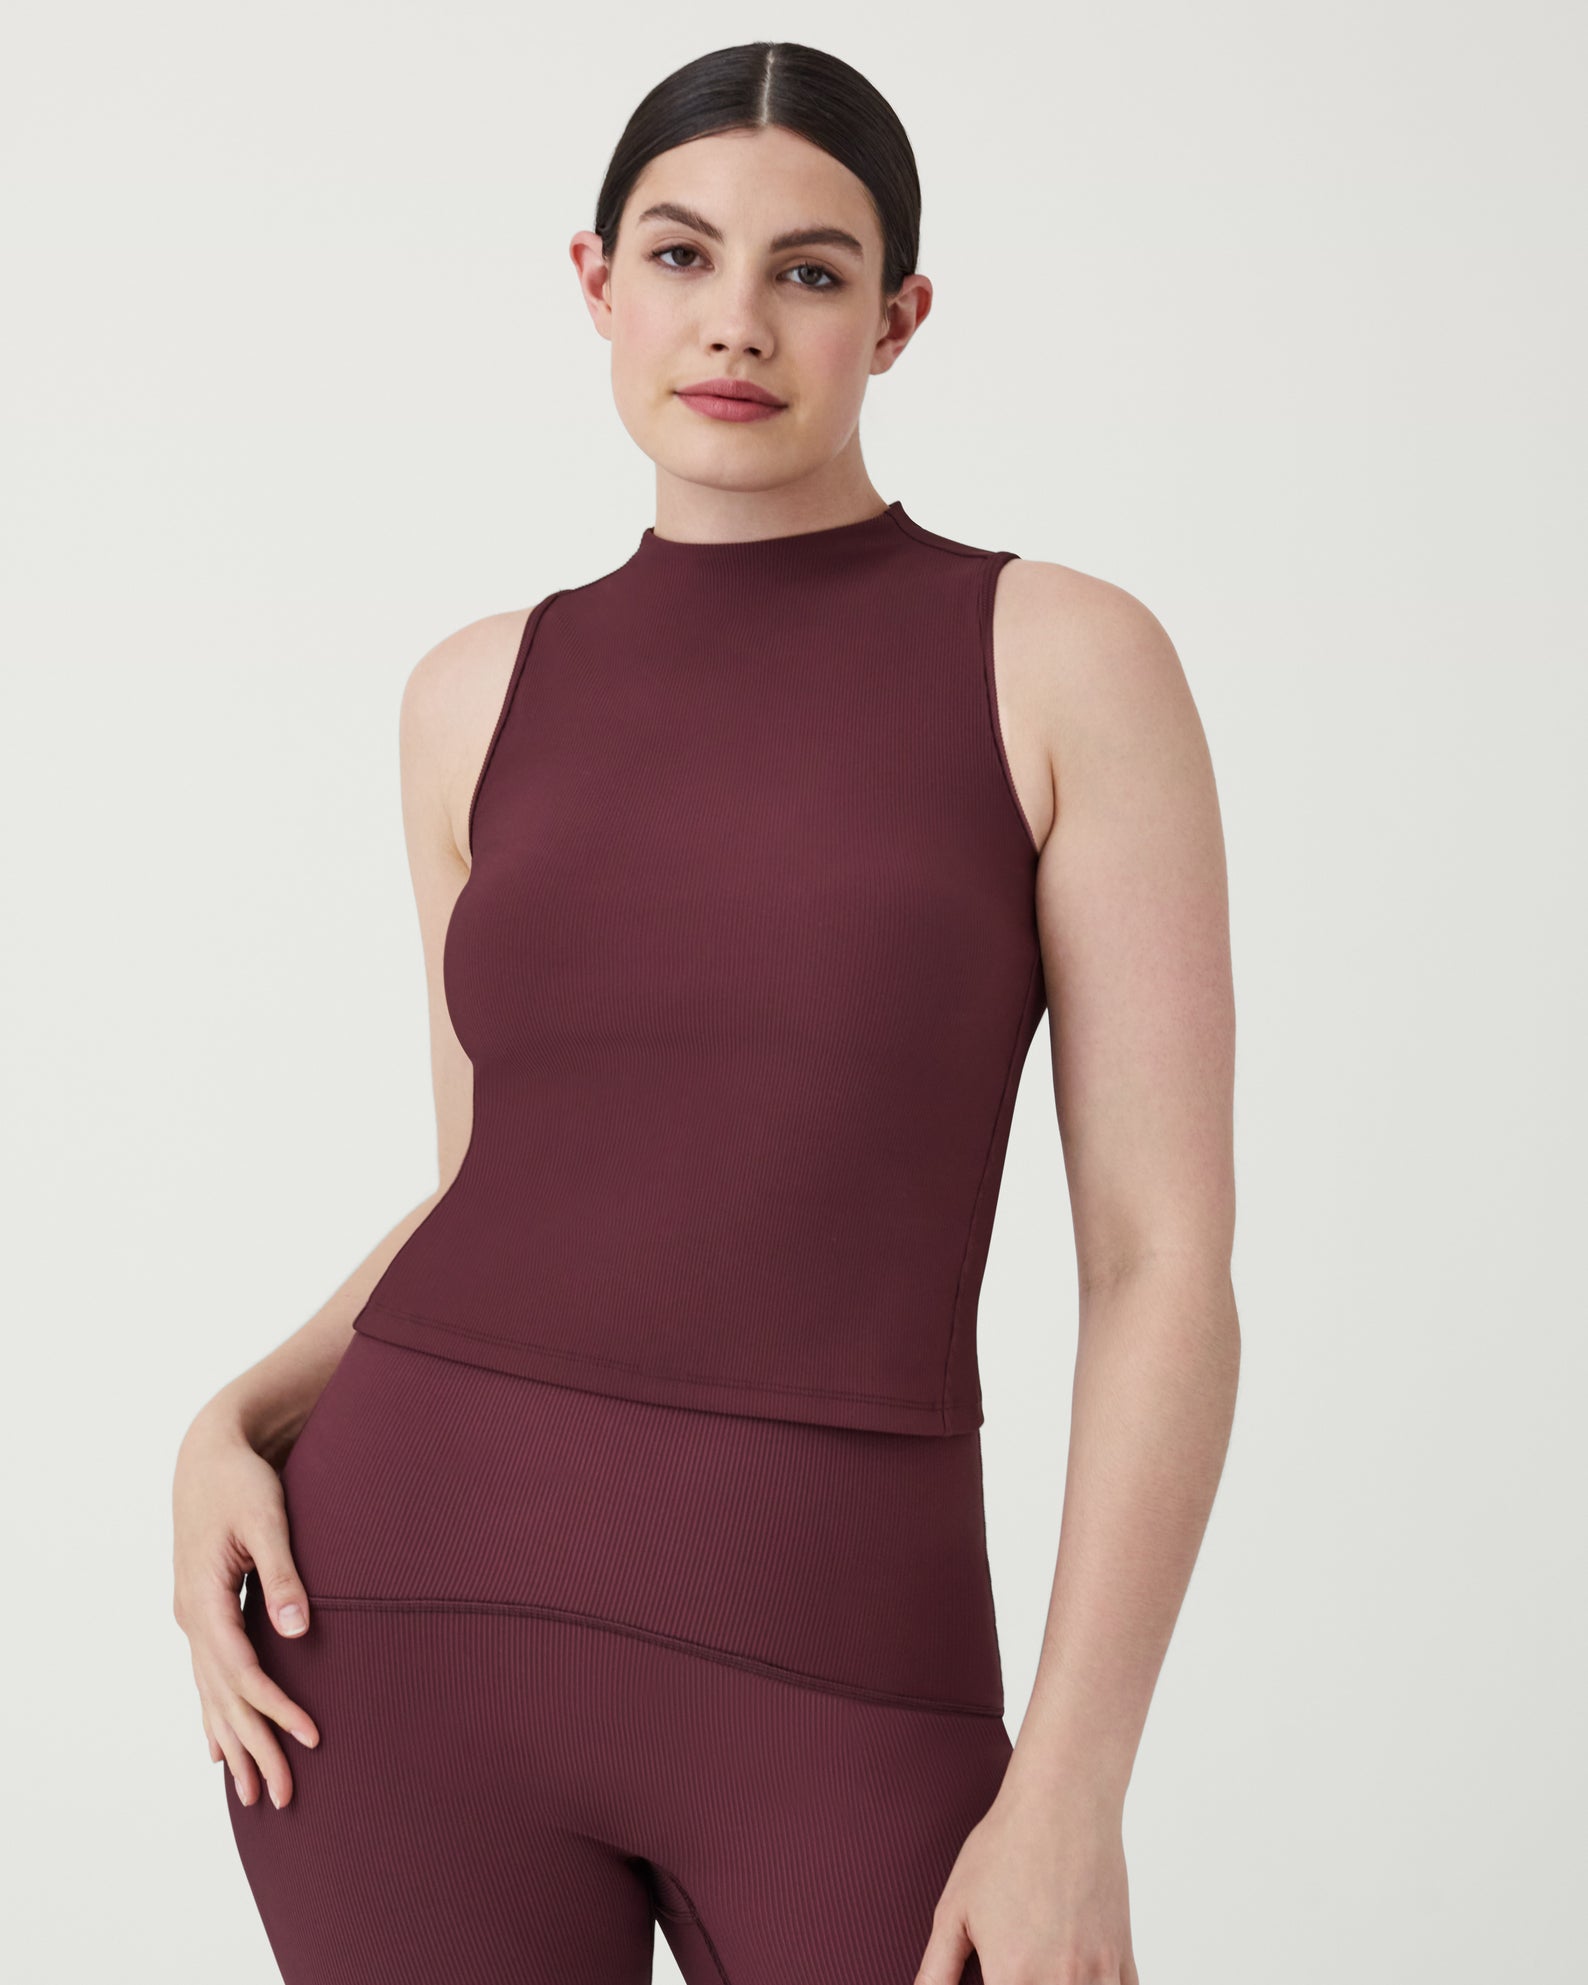 Take an Extra 30% Off Select Spanx Styles During Its End of Season Sale